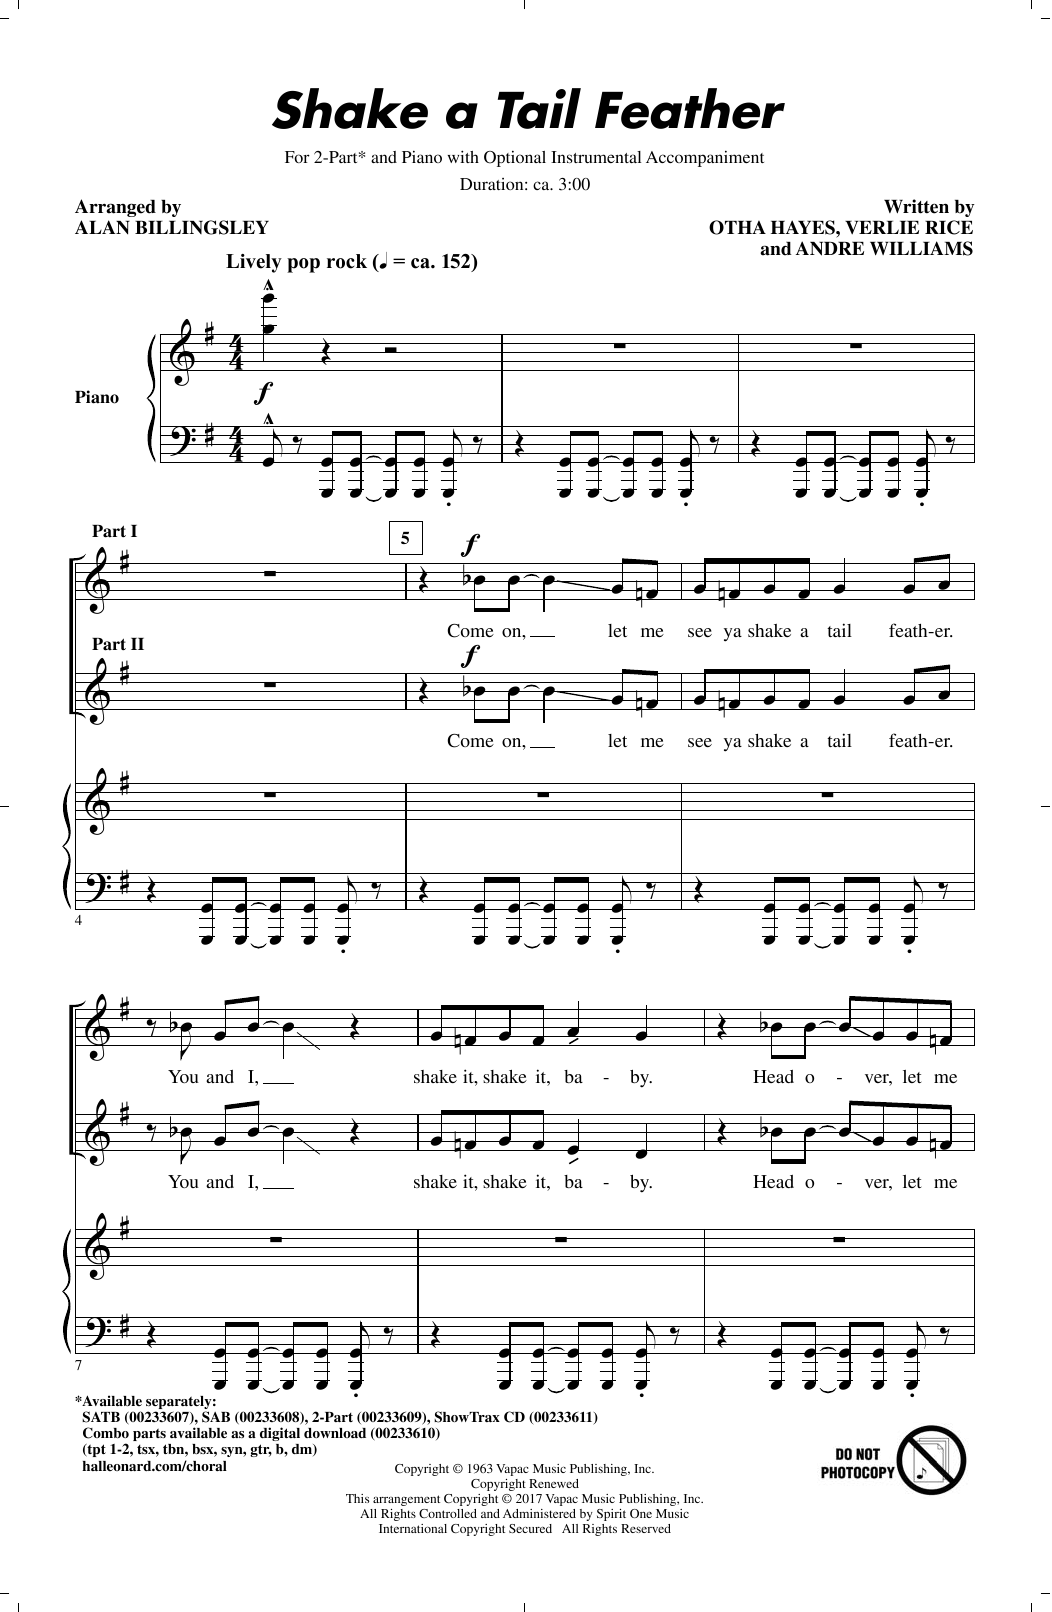 Alan Billingsley Shake A Tail Feather sheet music notes and chords. Download Printable PDF.